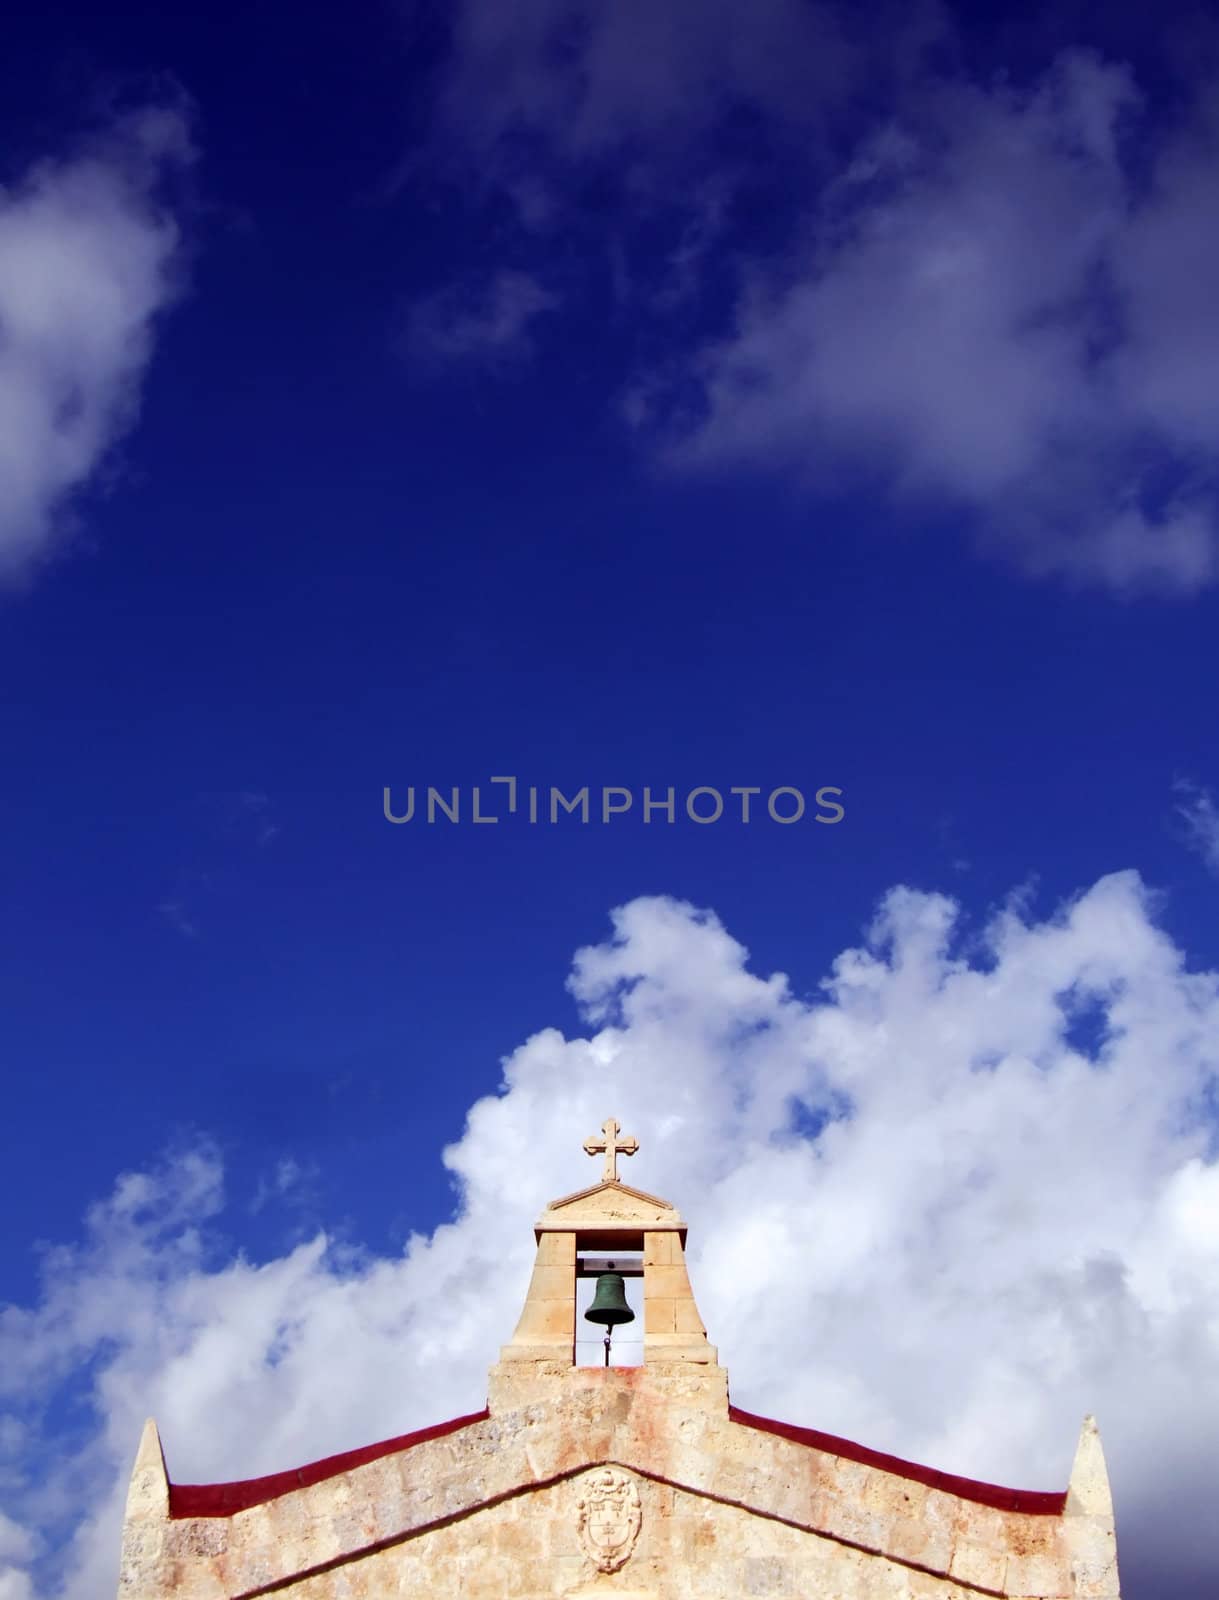 A medieval clocktower against blue sky and clouds